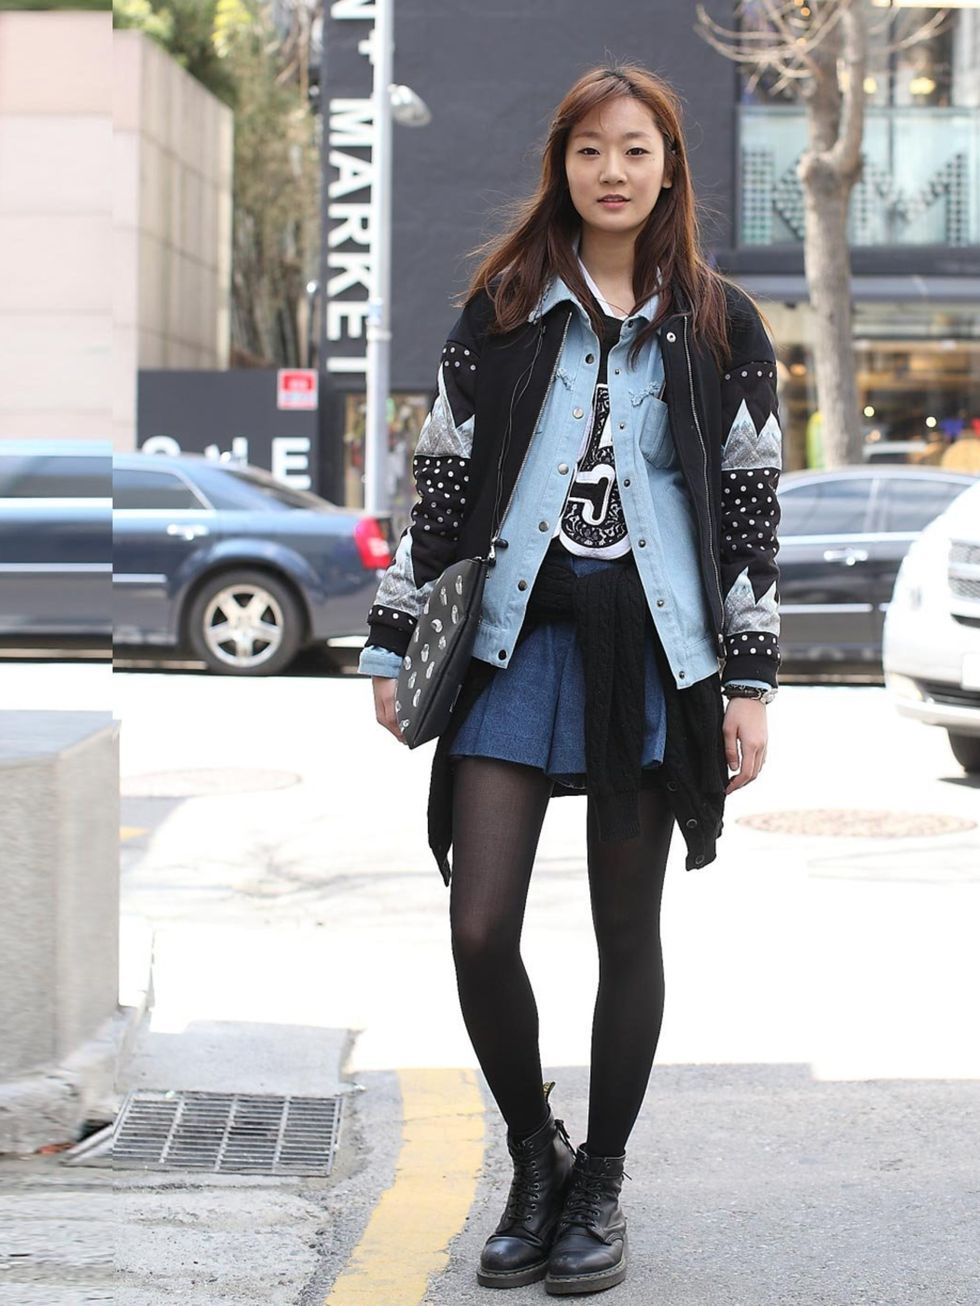 <p>Jihye wears Margarinfingers jacket and denim shirt with Dr. Martens boots.</p><p><em>More street style inspiration:</em></p><p><a href="http://www.elleuk.com/style/street-style/seoul-fashion-week-autumn-winter-2013">Seoul Fashion Week street style</a><